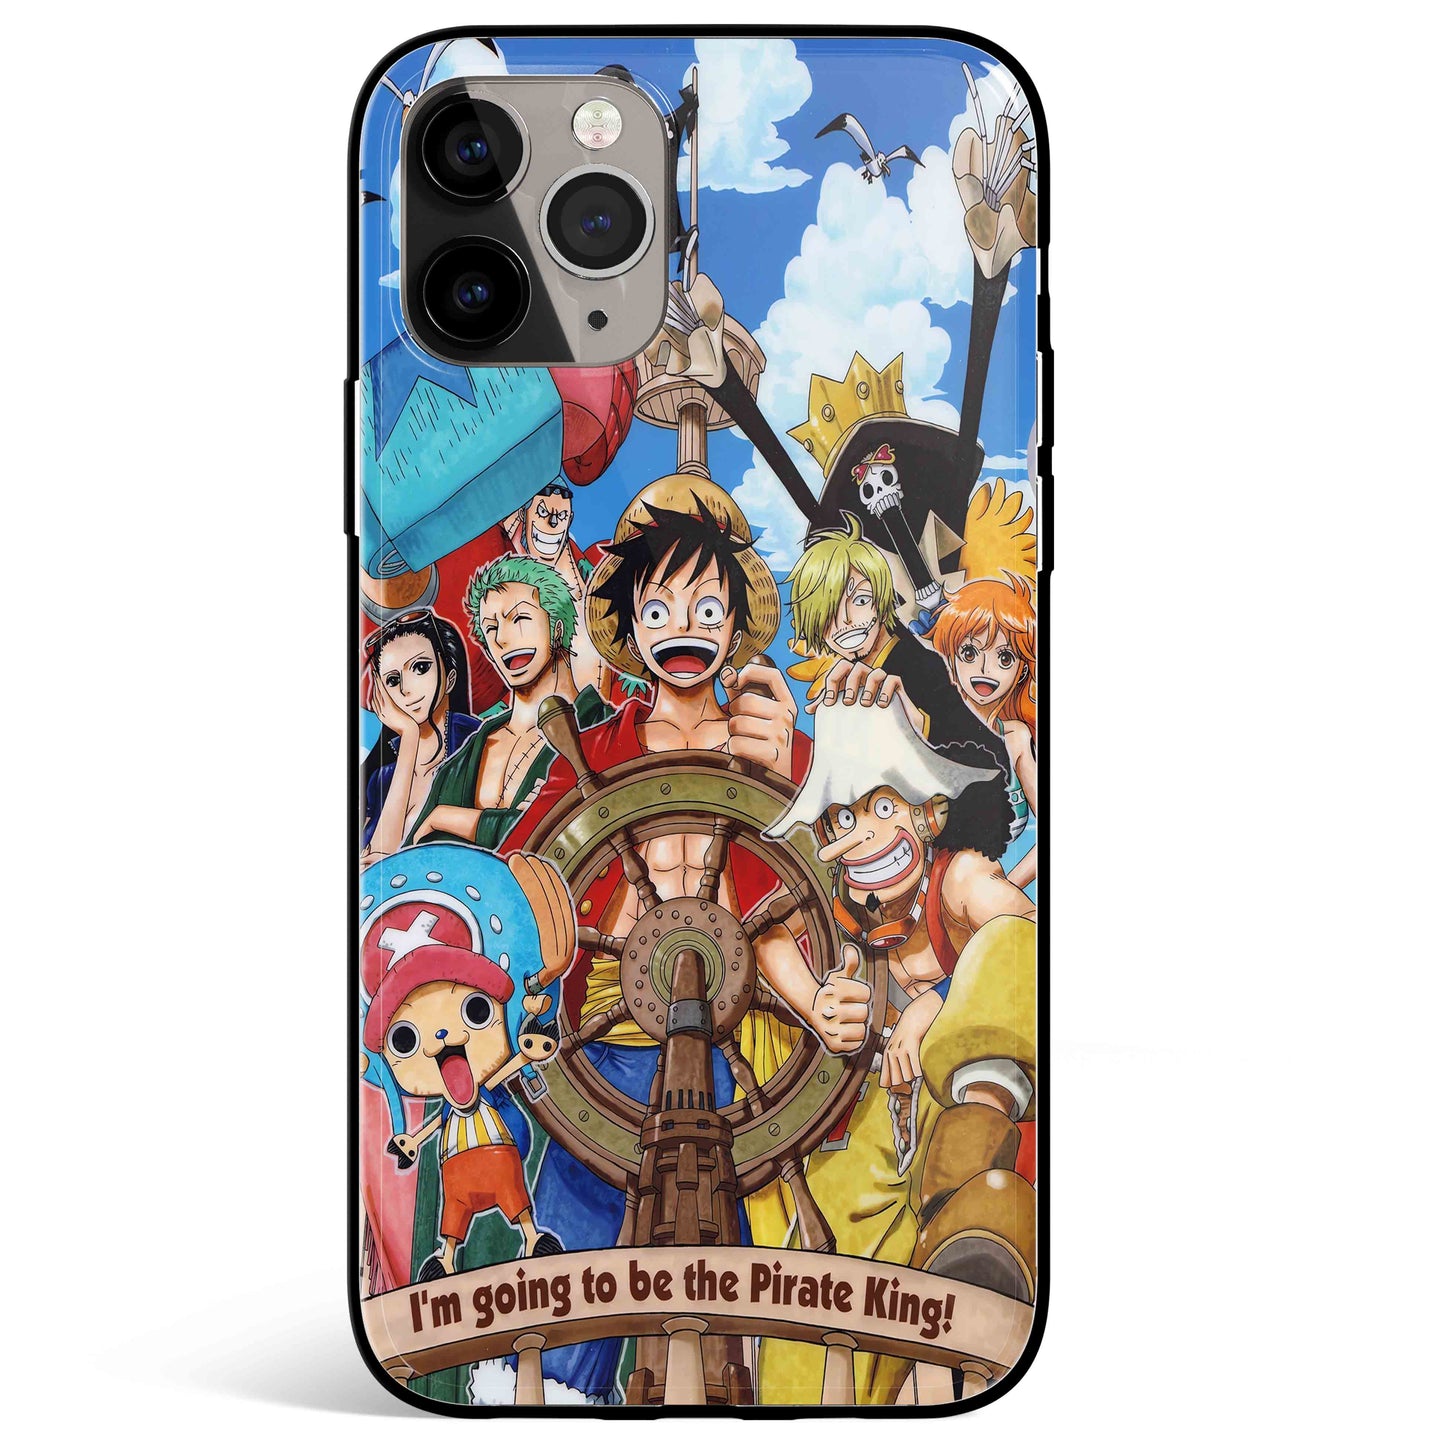 One Piece To Be the Pirate King Tempered Glass Soft Silicone iPhone Case